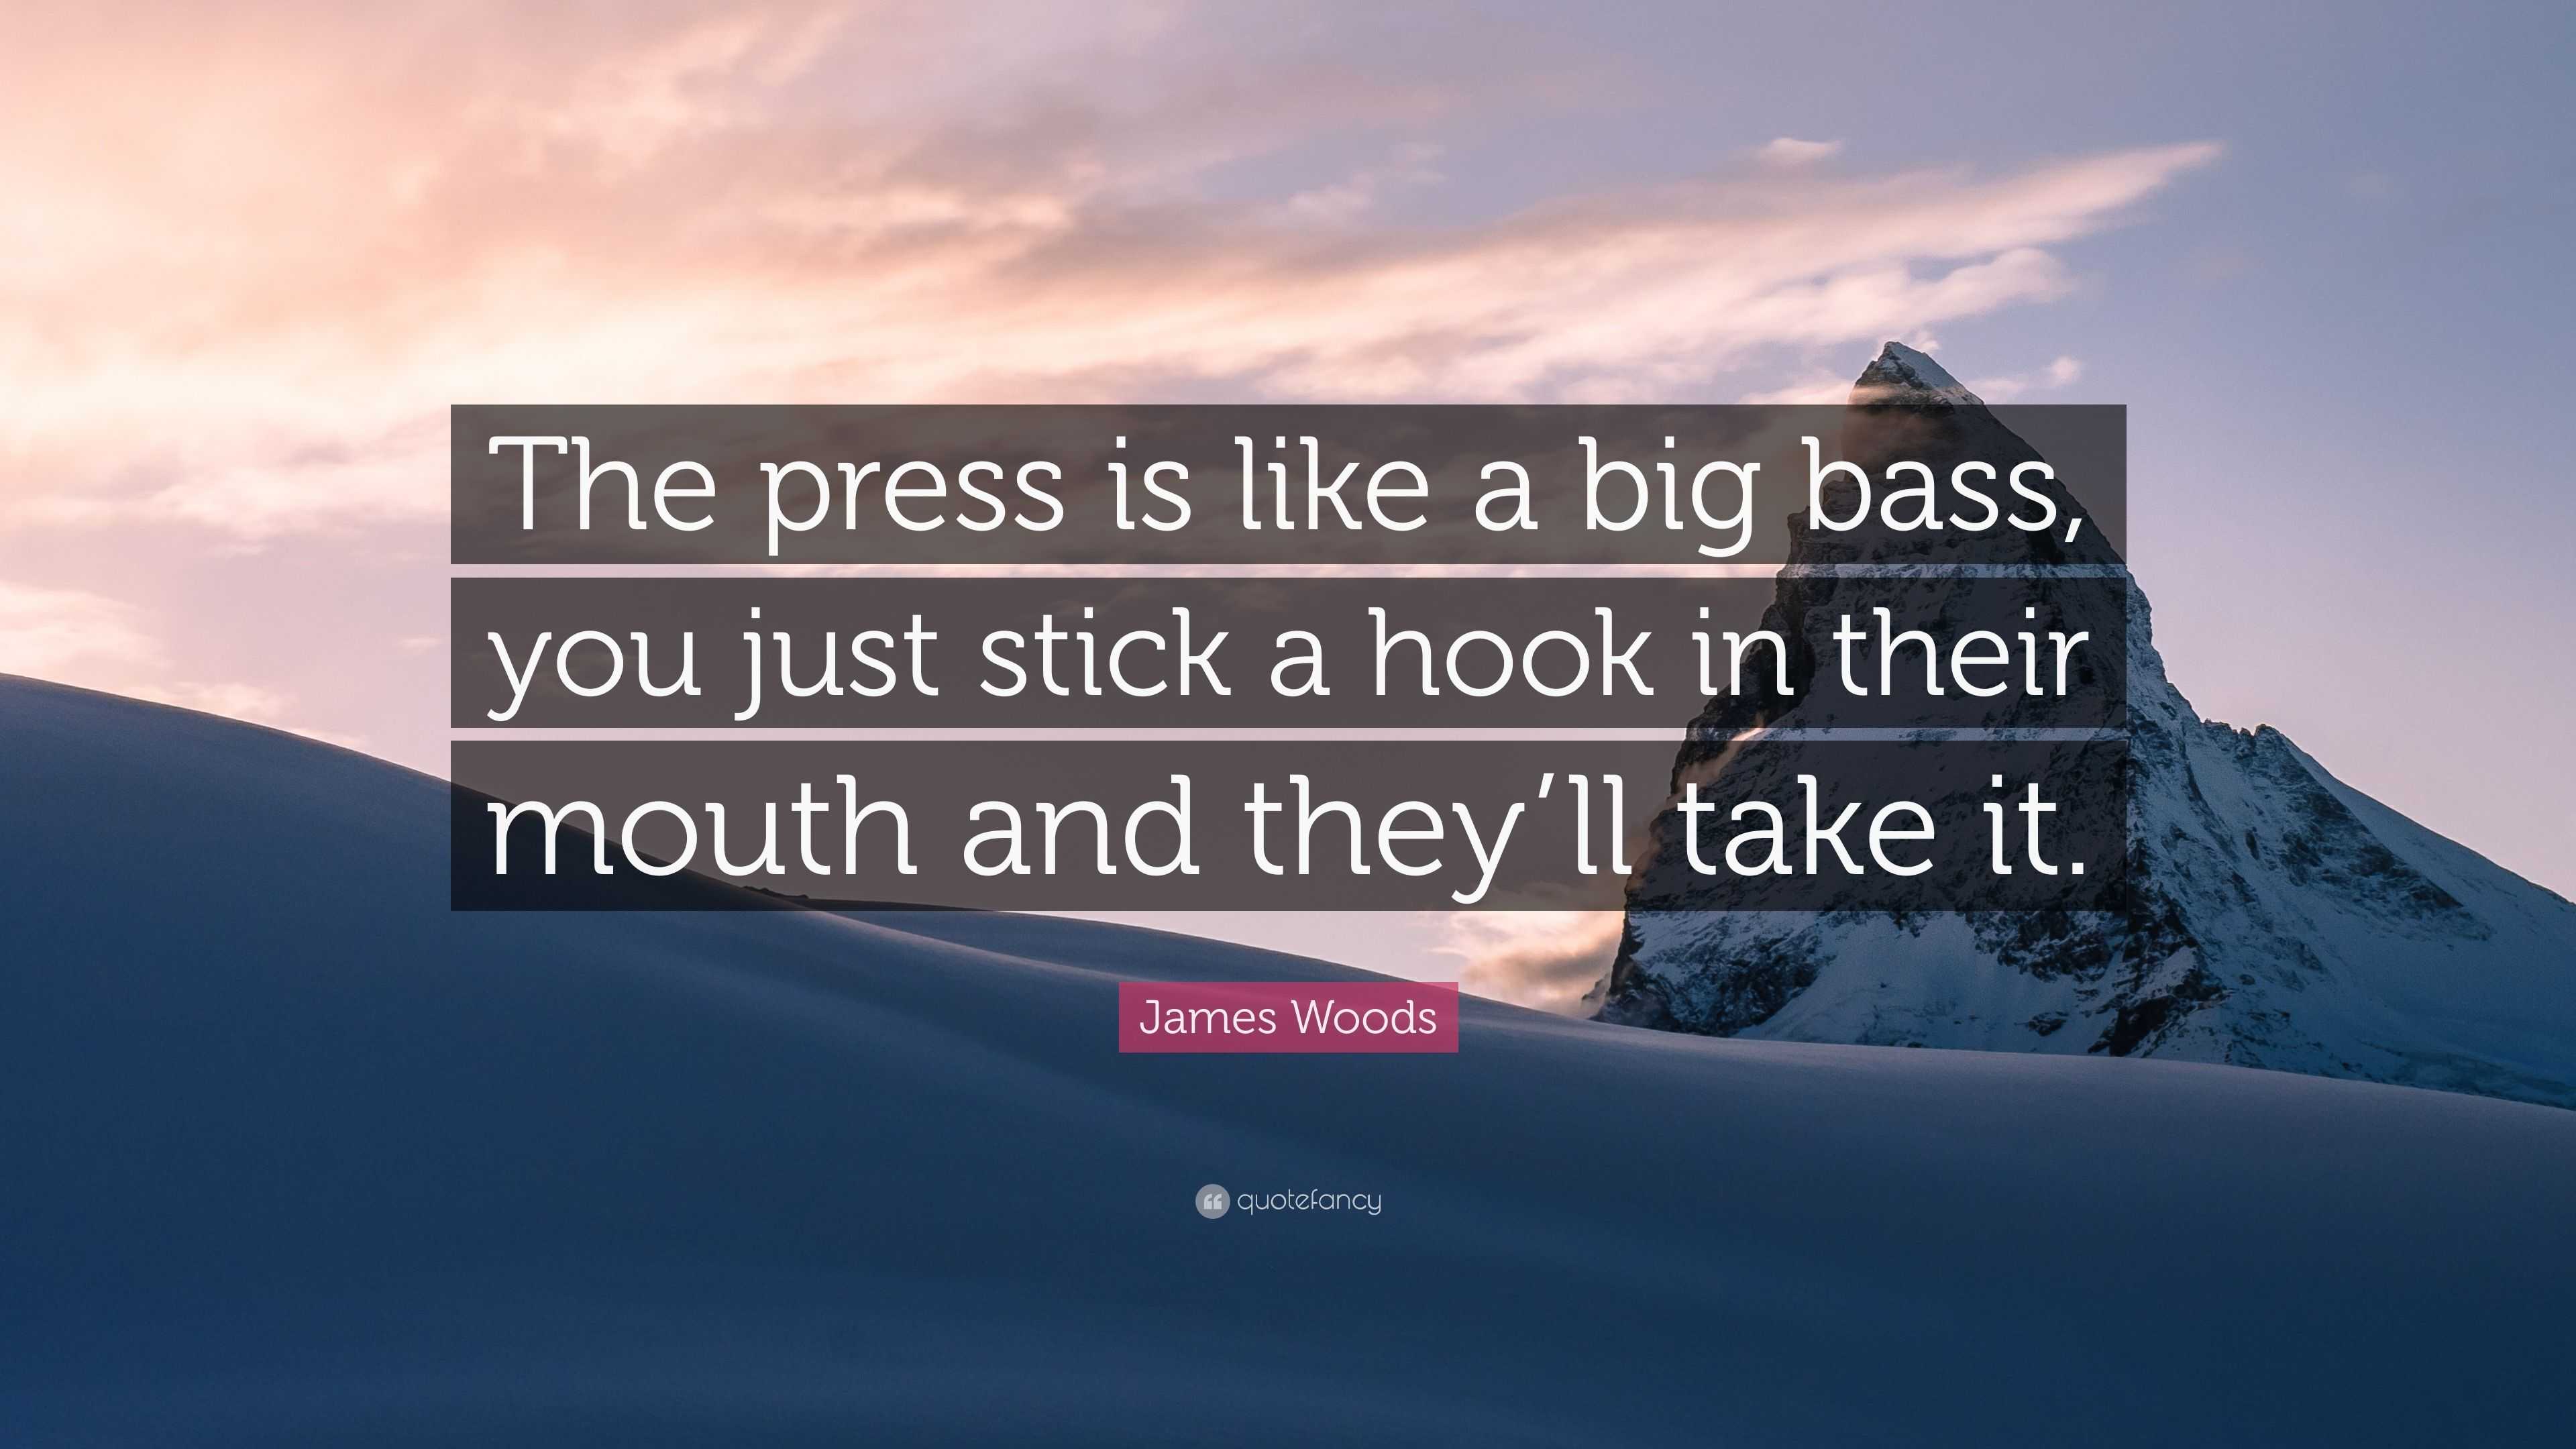 James Woods Quote: “The press is like a big bass, you just stick a